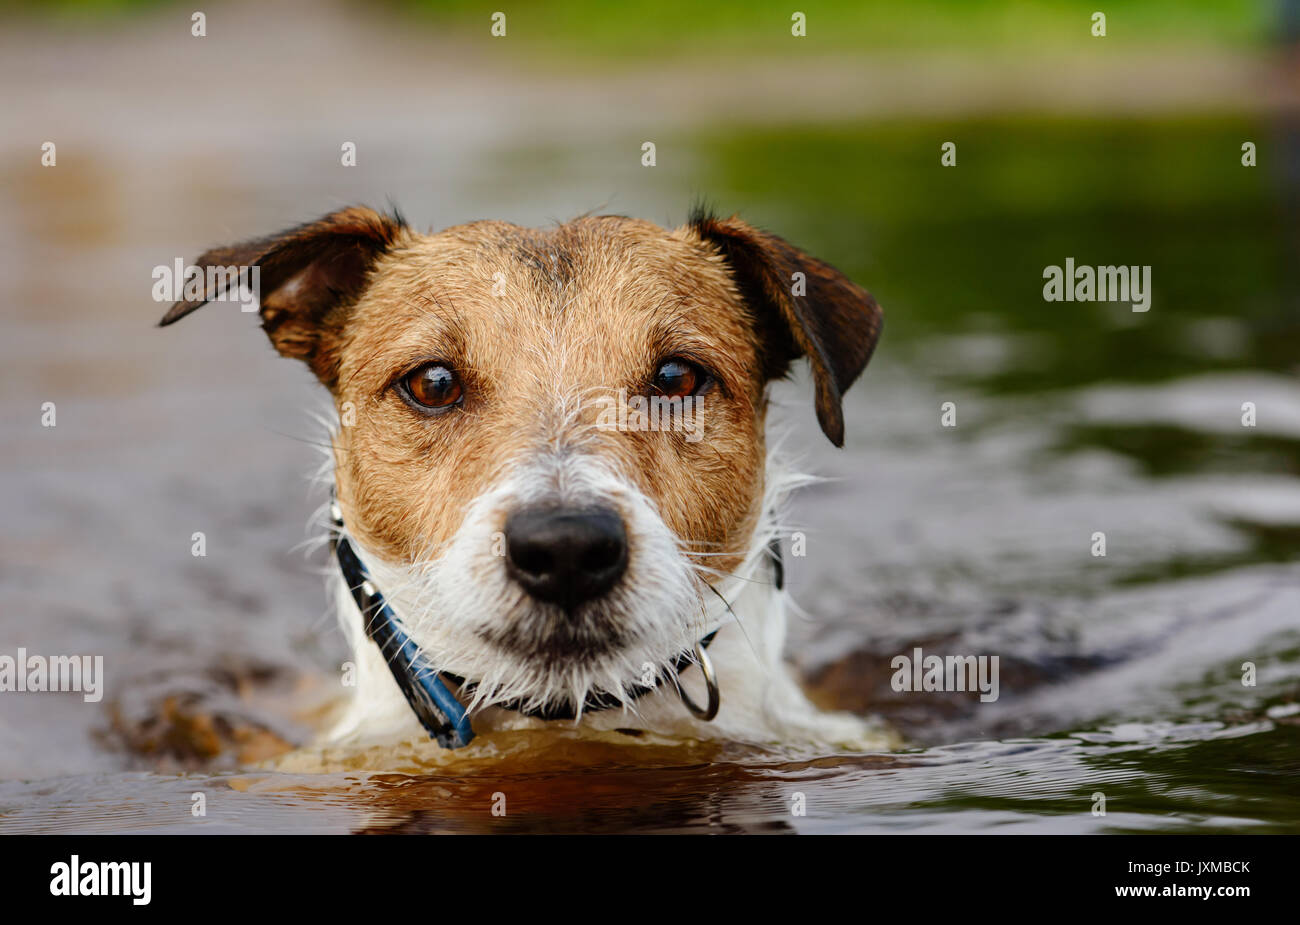 Cute dog swims in water close up shot Stock Photo